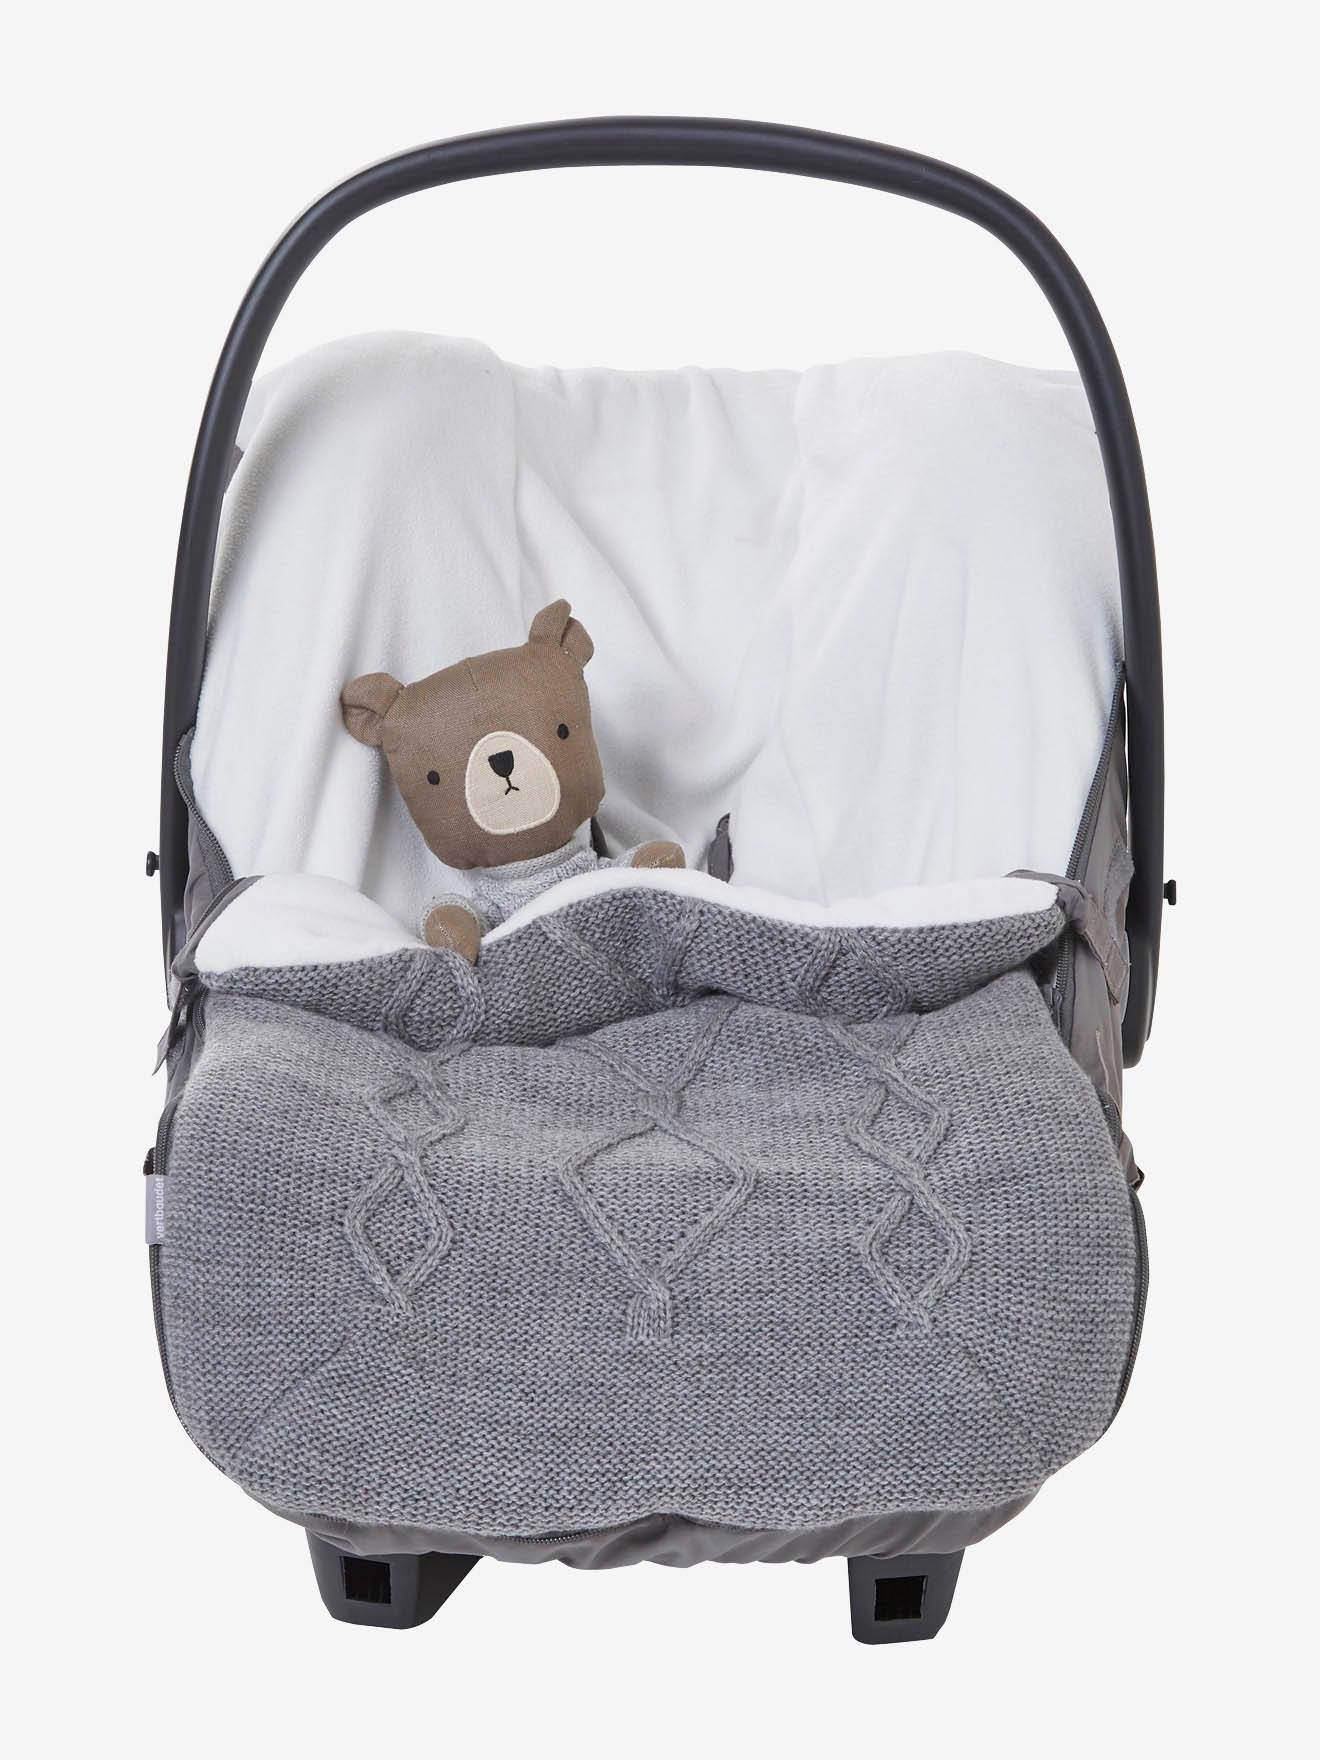 baby footmuff for car seat